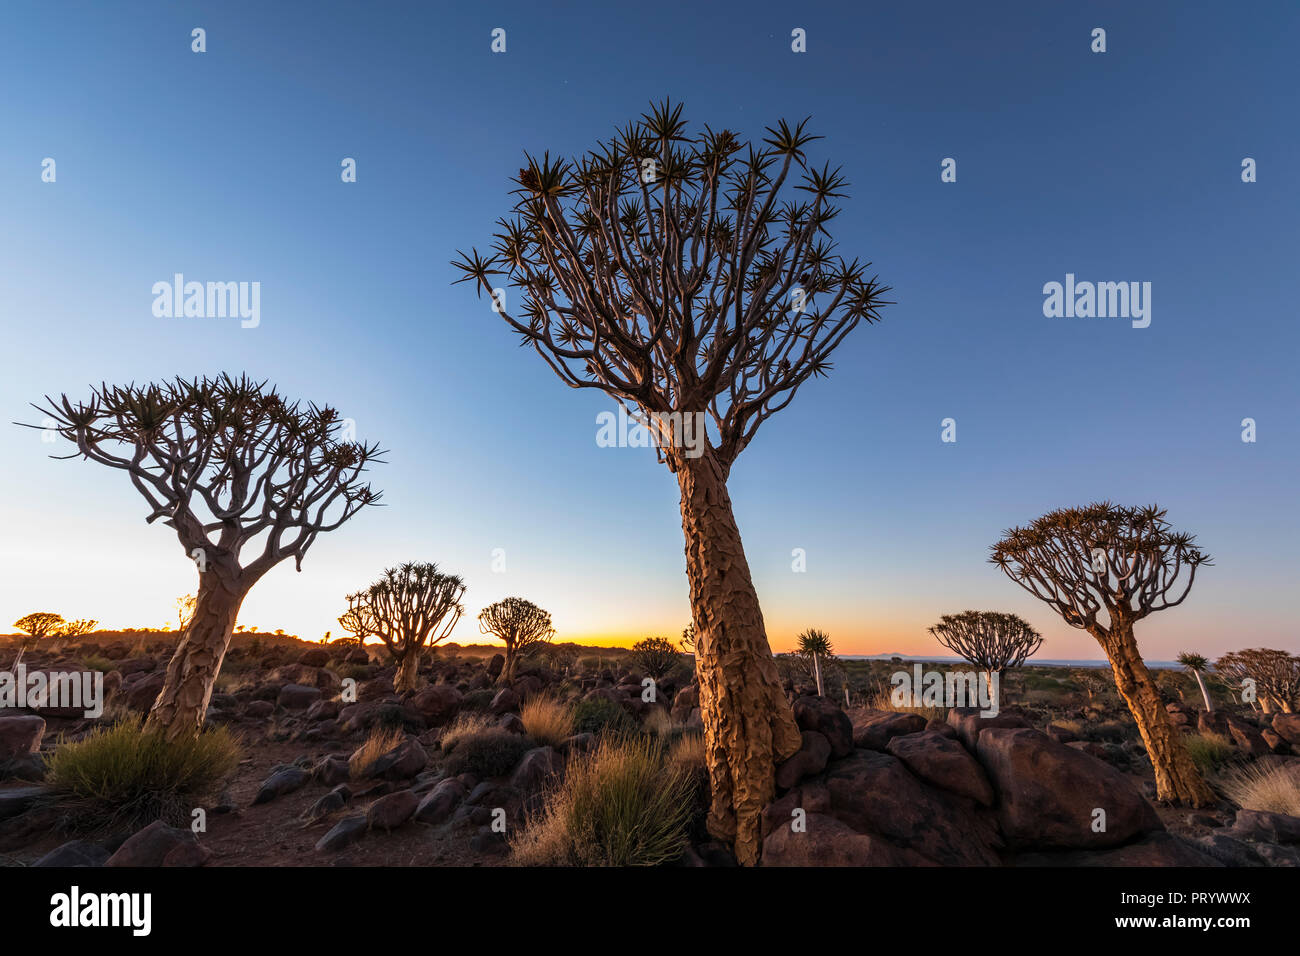 Africa, Namibia, Keetmanshoop, Quiver Tree Forest all'alba Foto Stock